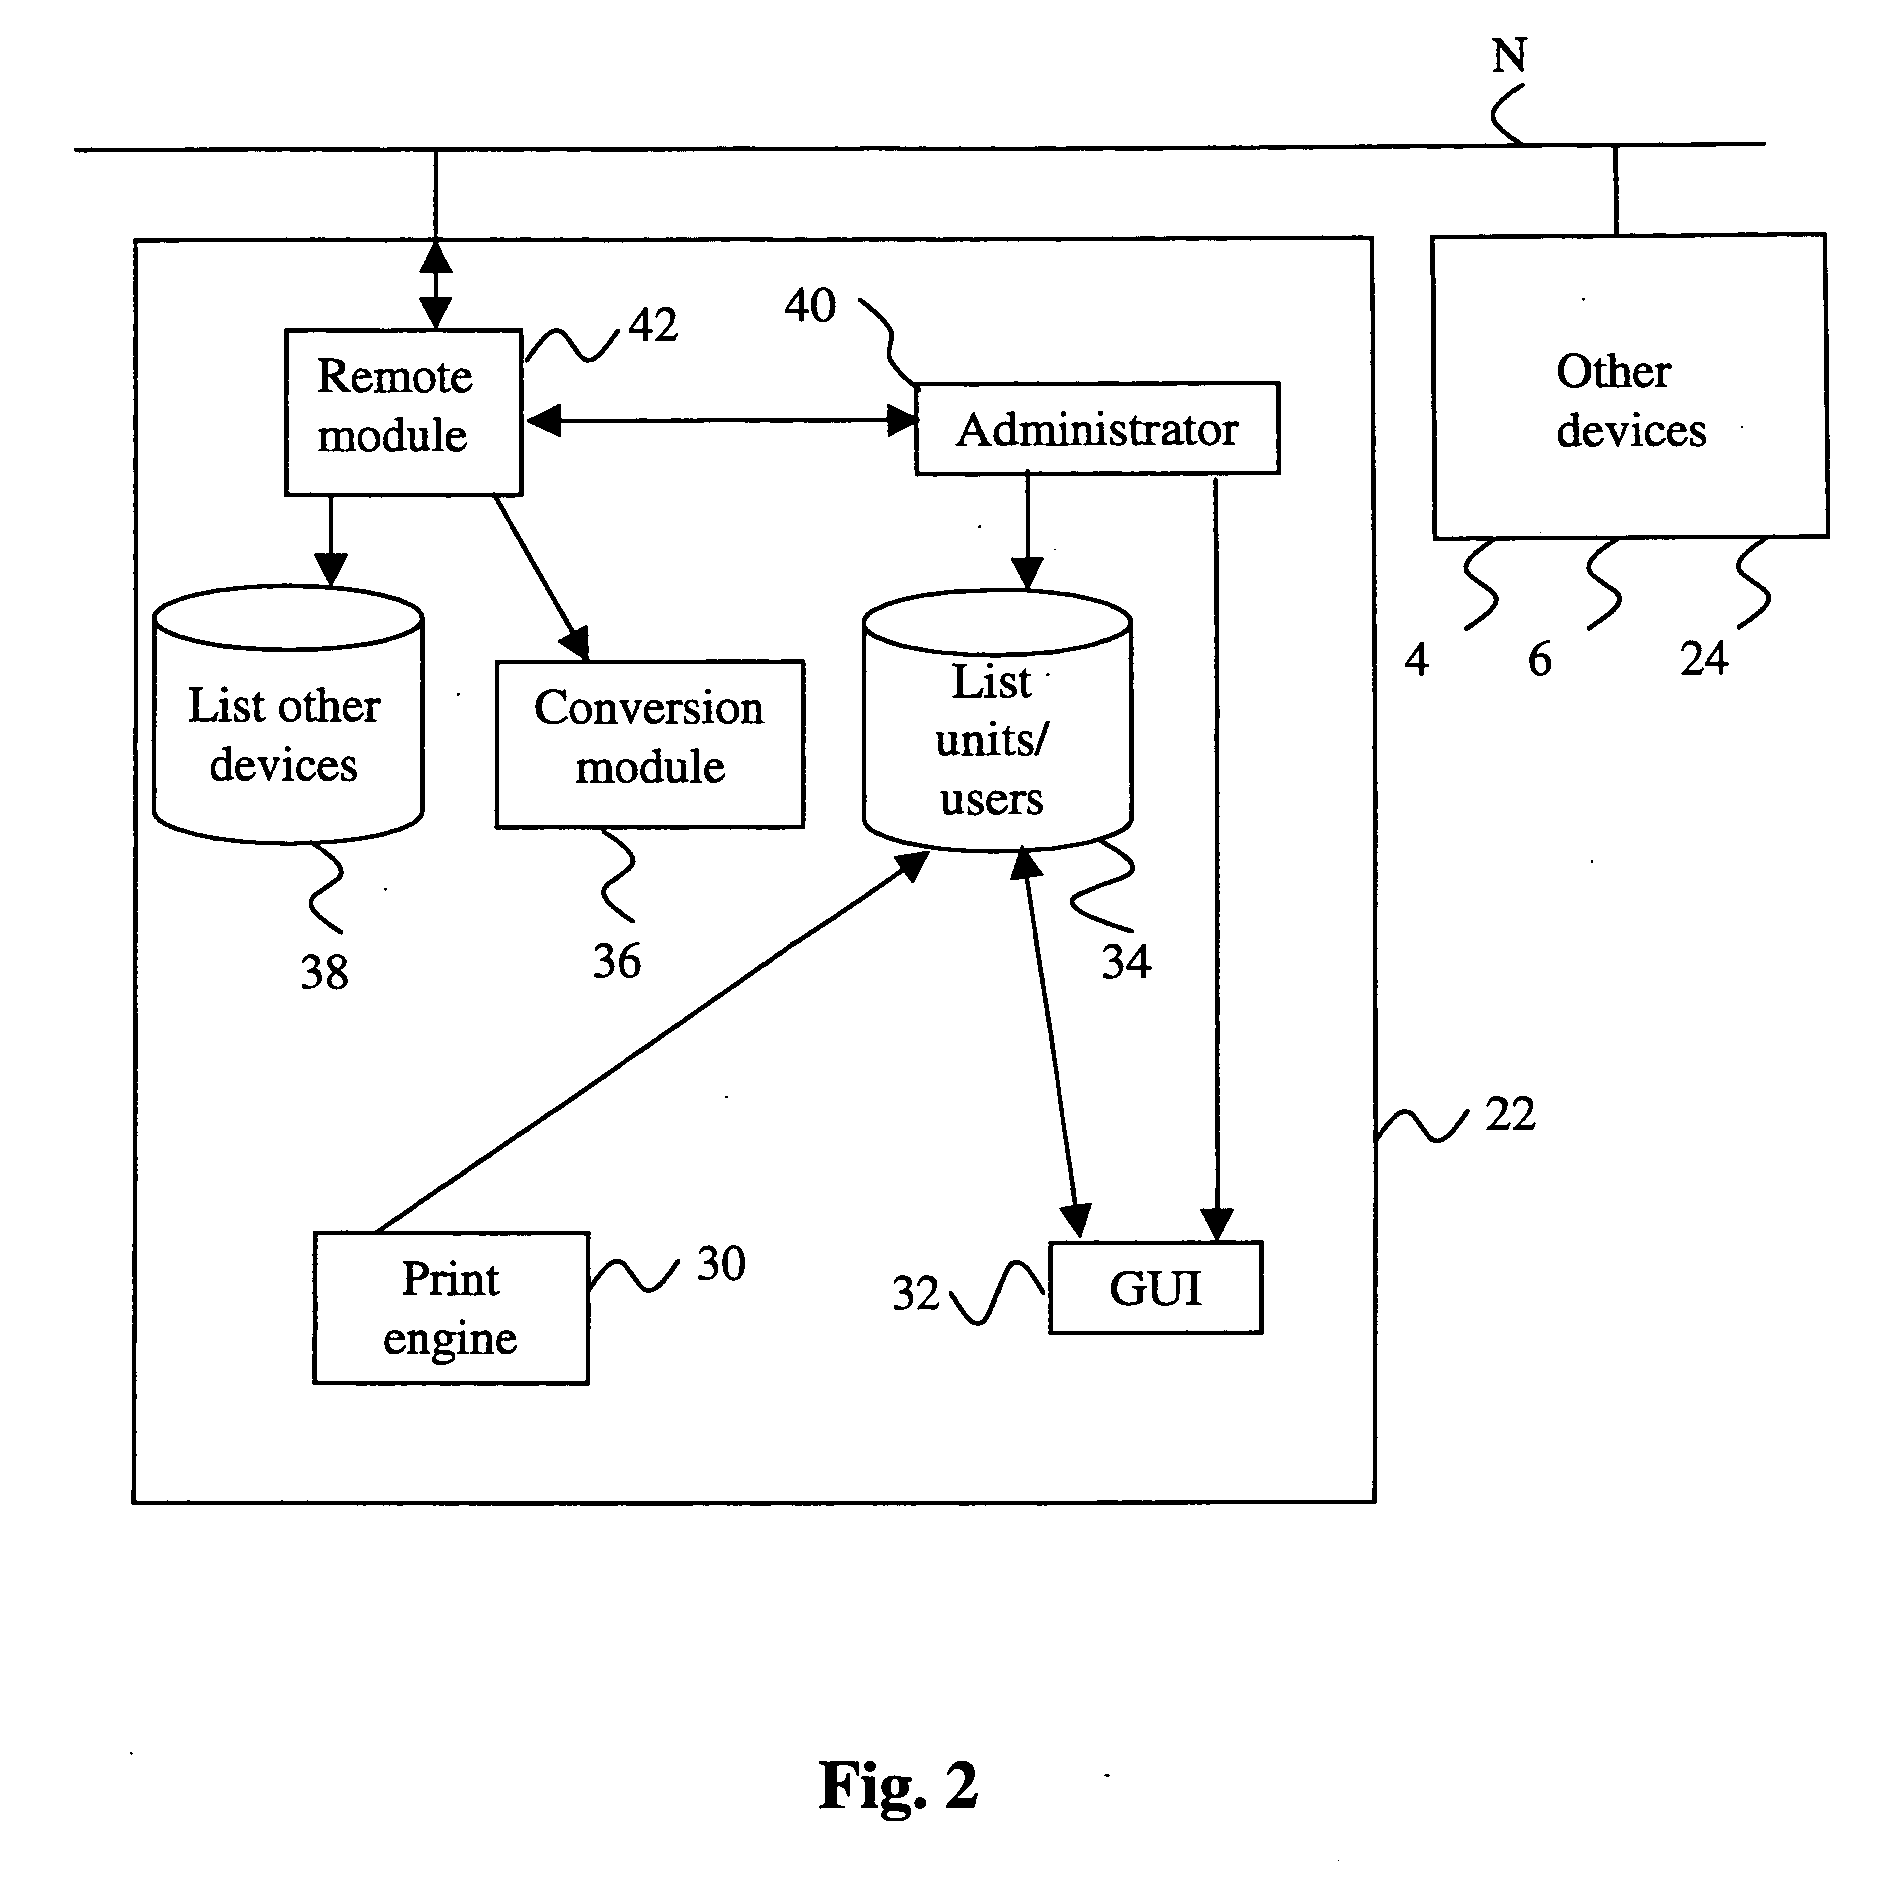 Method and apparatus for managing stocks of consumption units in a system of document processing devices in a network